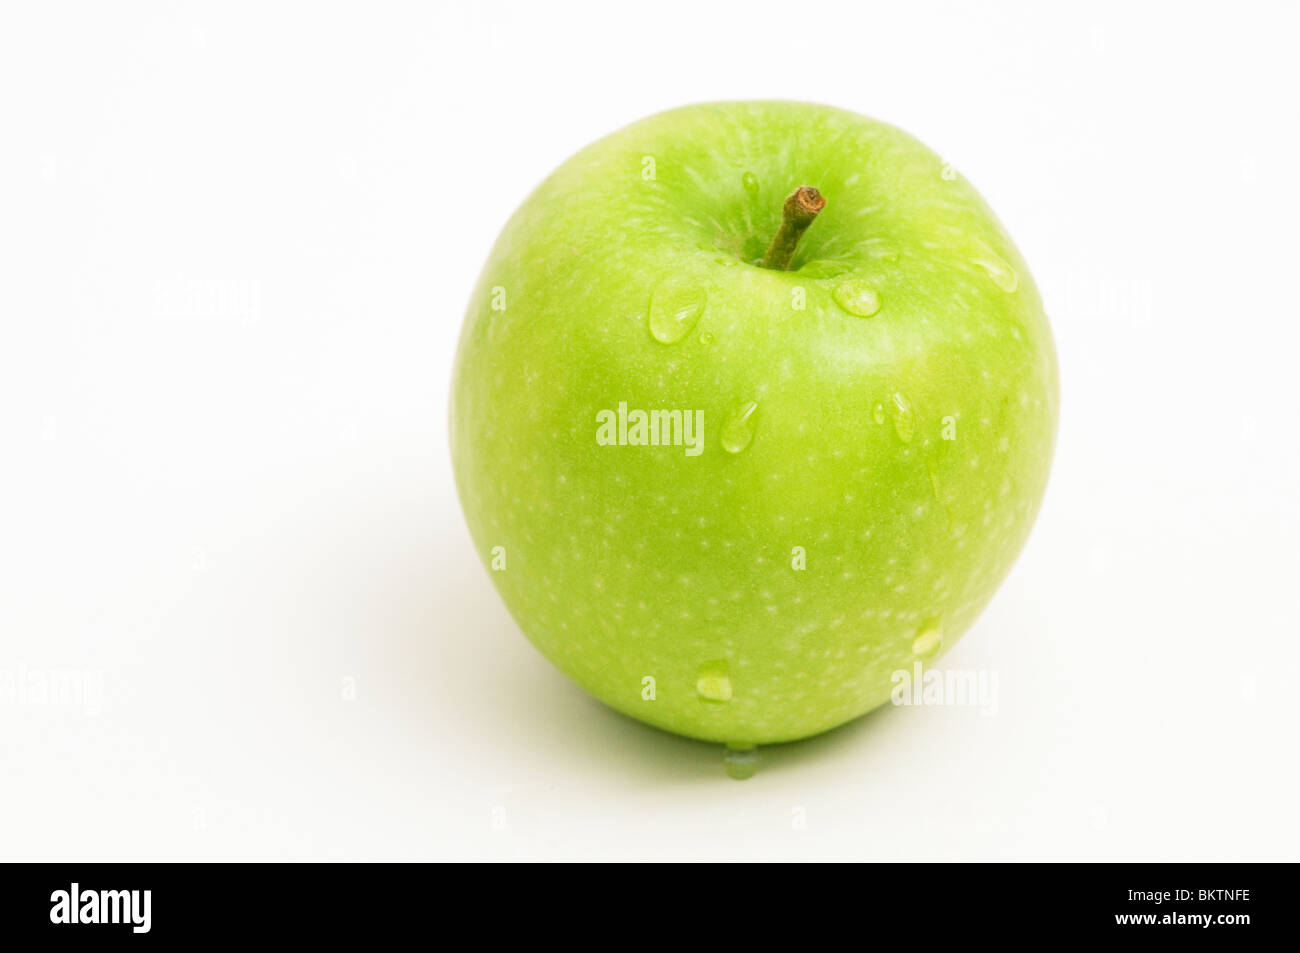 SINGLE GRANNY SMITH APPLE MALUS DOMESTICA ON WHITE BACKGROUND WITH WATER DROPLETS Stock Photo